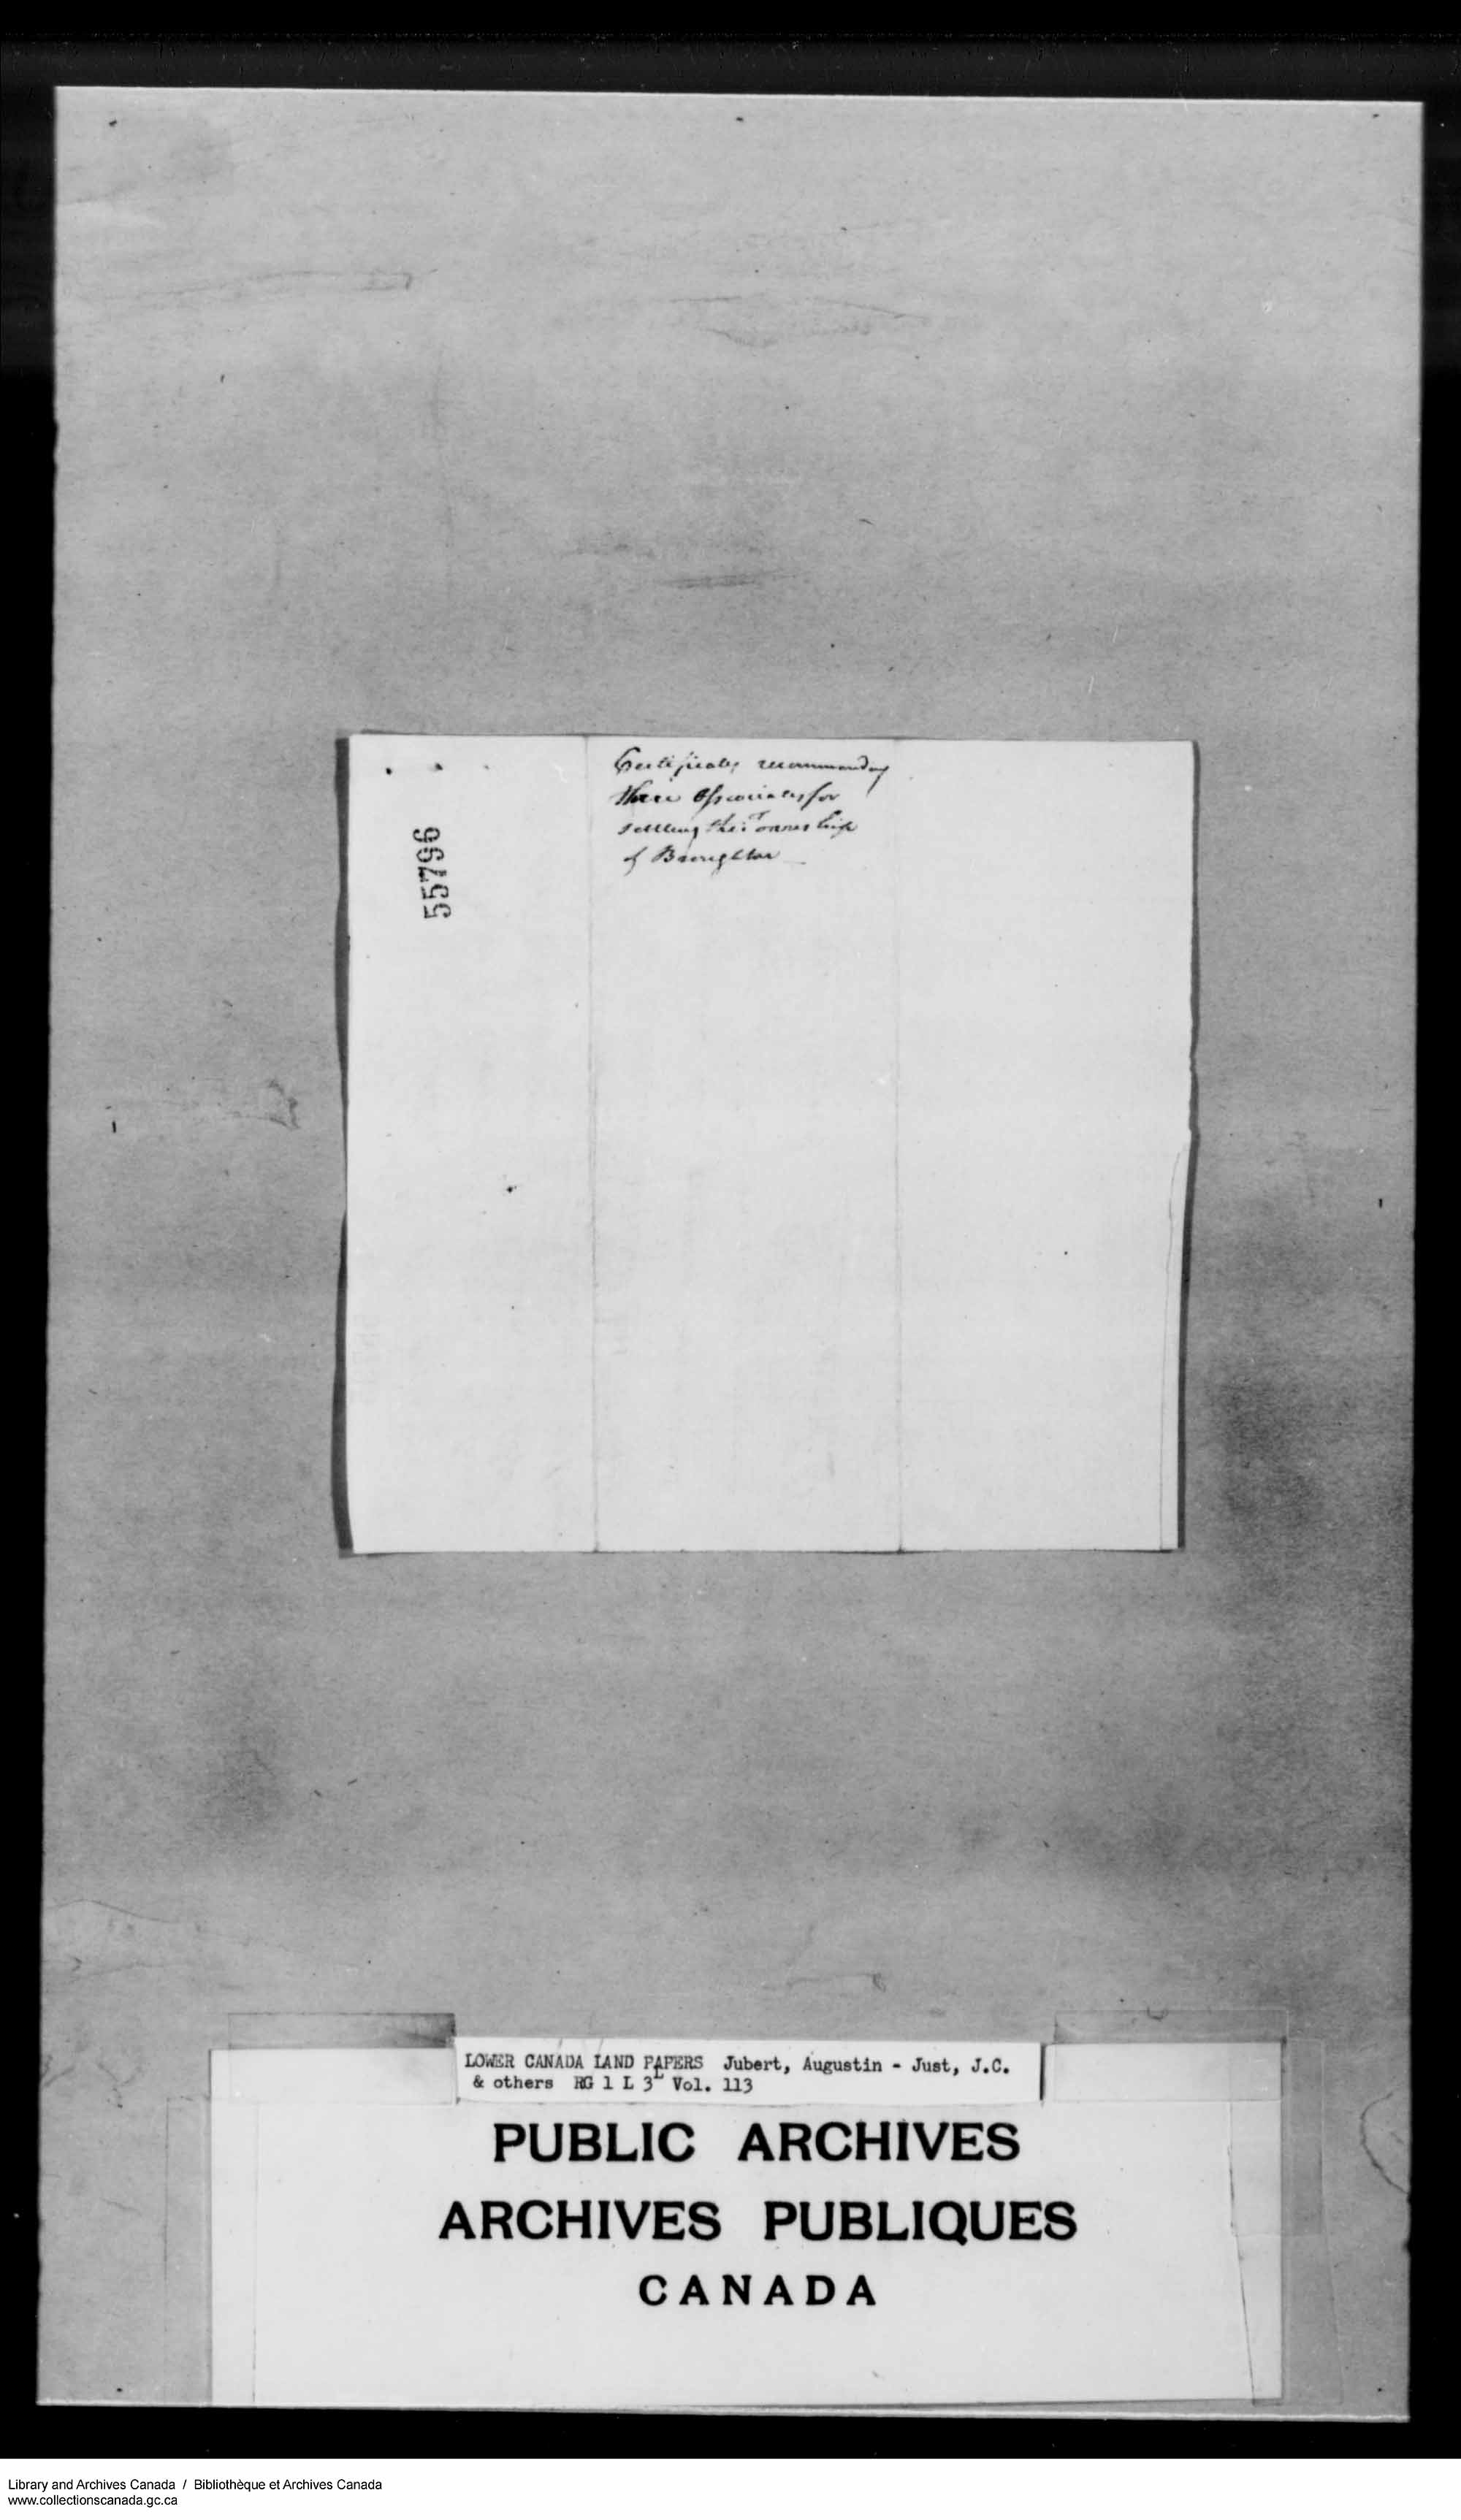 Digitized page of  for Image No.: e008700283